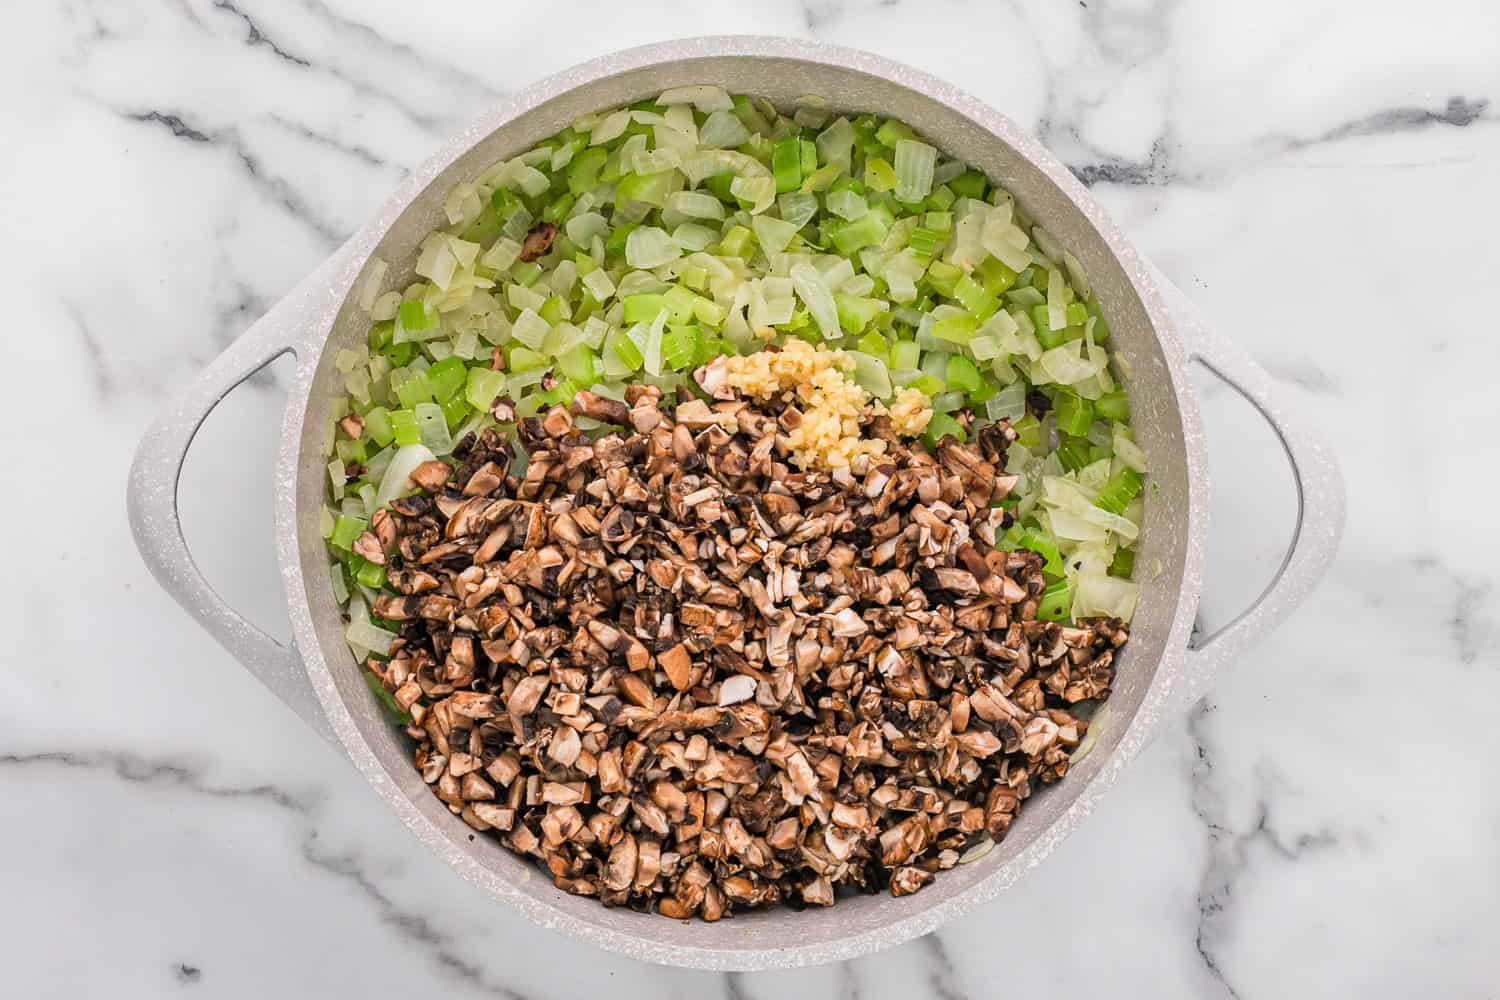 Sauteed onions, celery, and mushrooms in an off white pan.